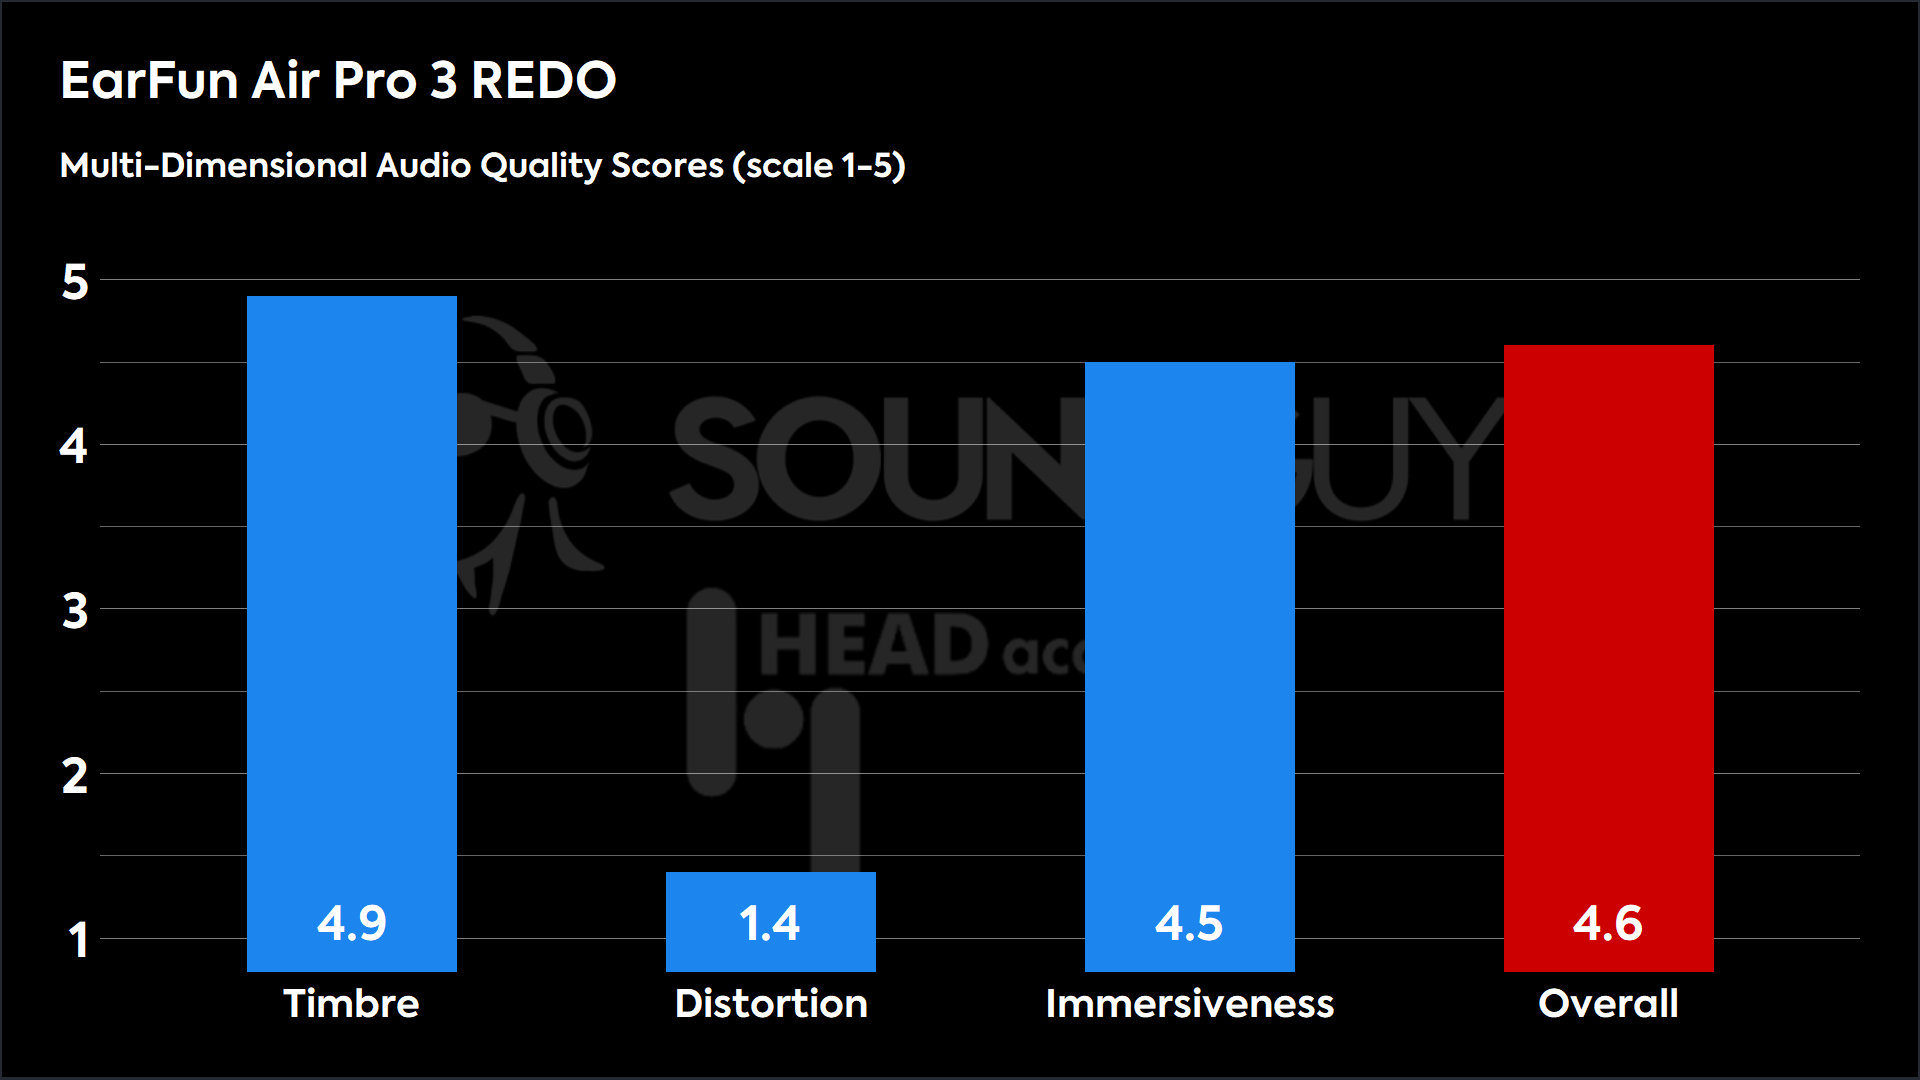 This chart shows the MDAQS results for the EarFun FreePro 3 in Default mode. The Timbre score is 4.7, The Distortion score is 3.4, the Immersiveness score is 4.8, and the Overall Score is 4.5.